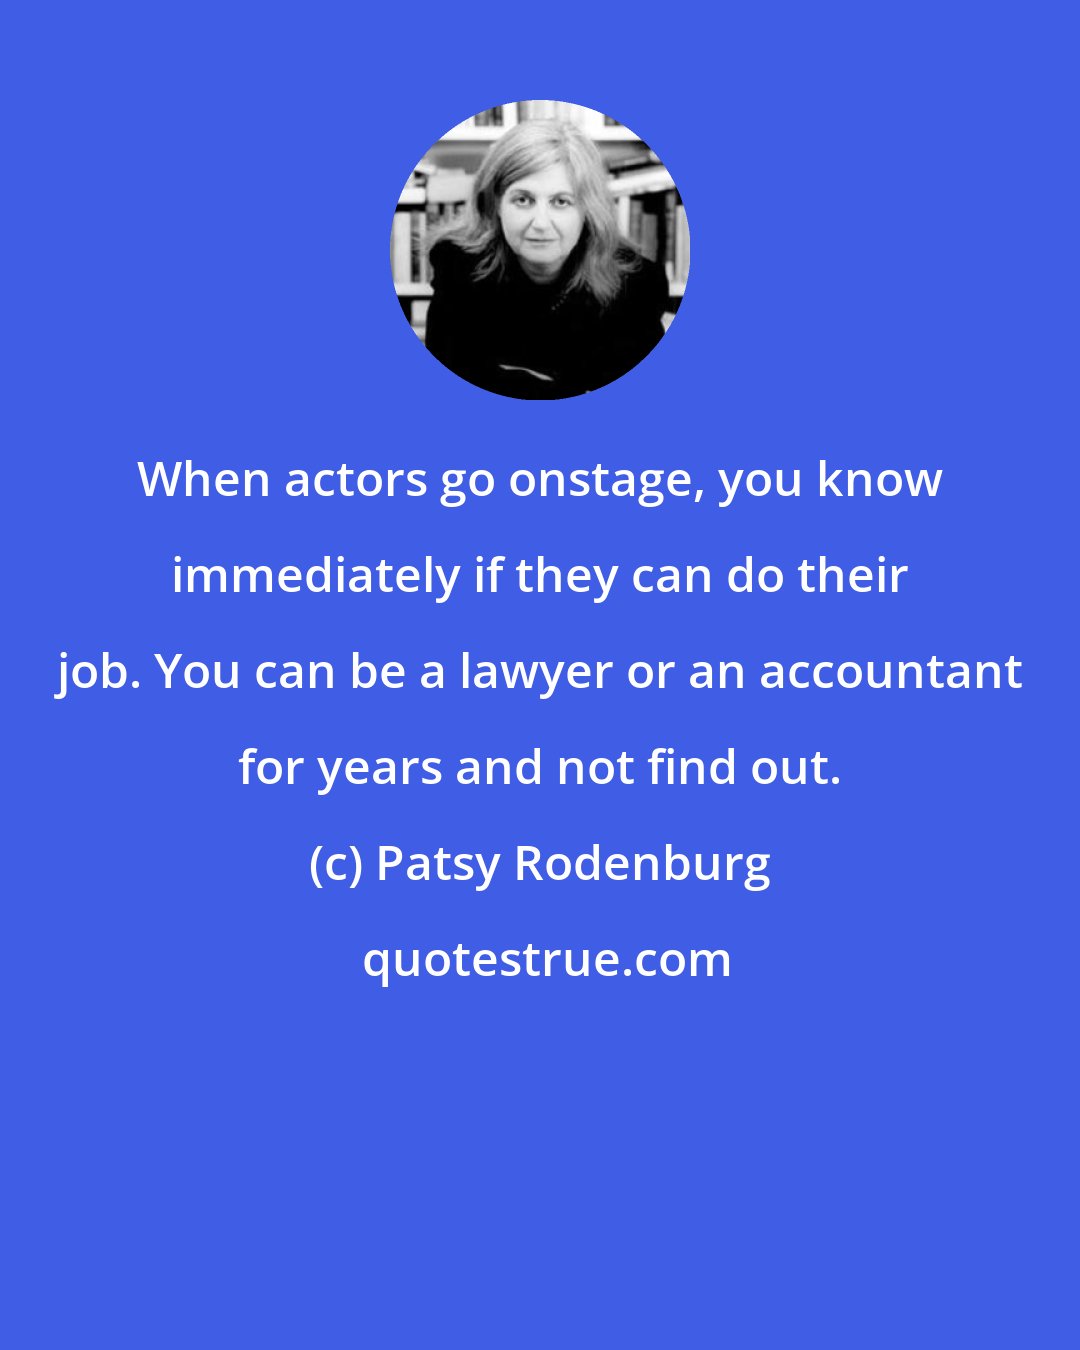 Patsy Rodenburg: When actors go onstage, you know immediately if they can do their job. You can be a lawyer or an accountant for years and not find out.